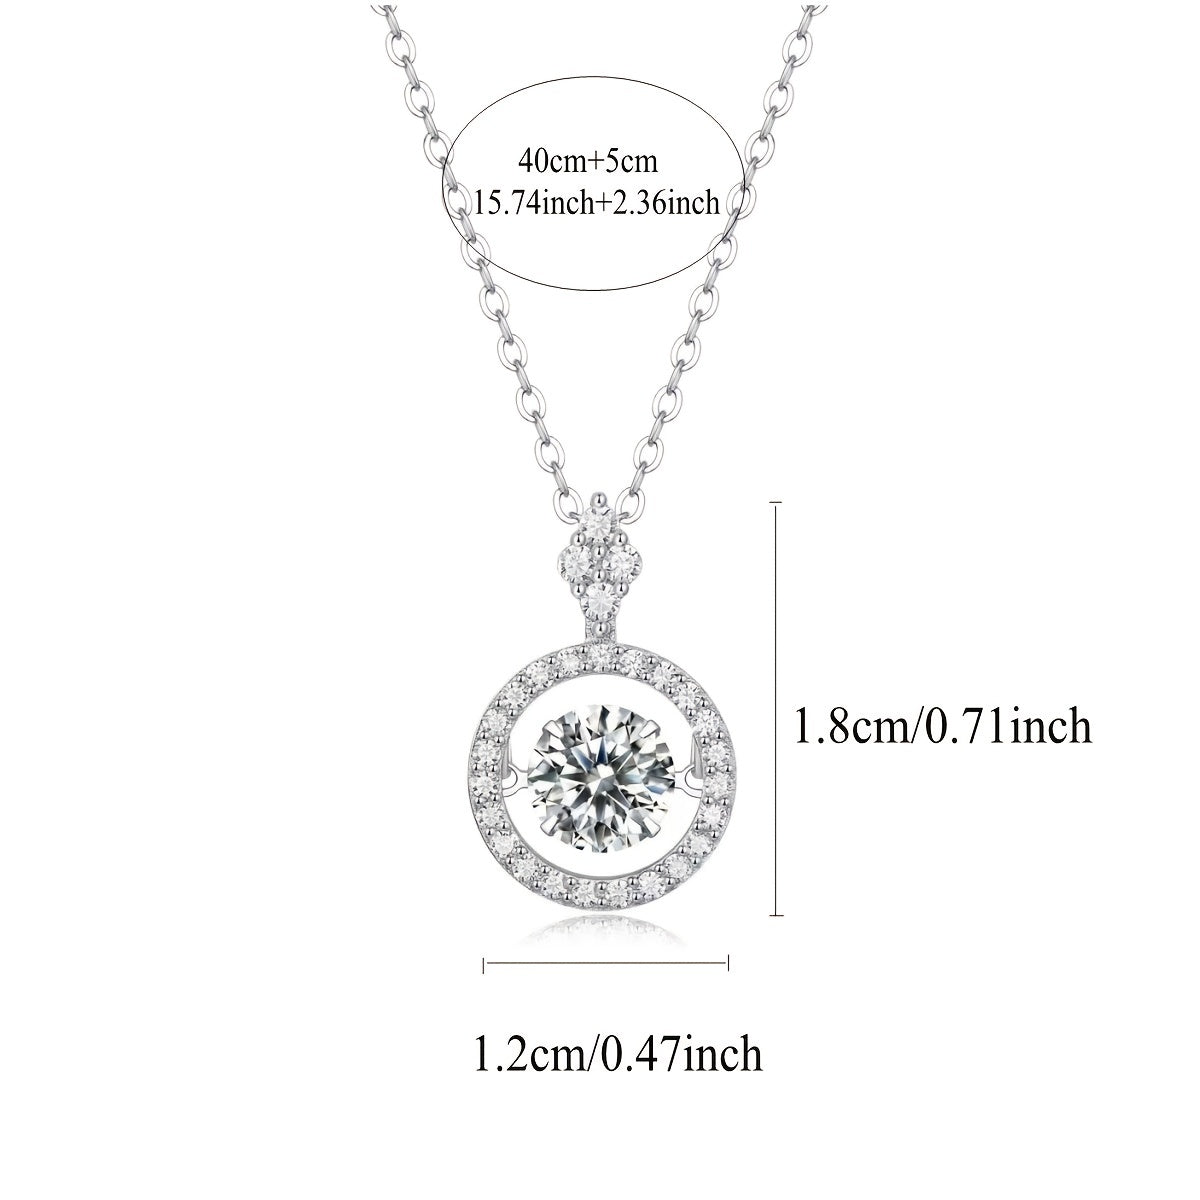 Adjustable Moissanite Pendant Necklace - Stunning 925 Silver Jewelry for Women & Girls - Perfect Gift for Valentine's Day, Mother's Day, Thanksgiving, Anniversary, or Birthday